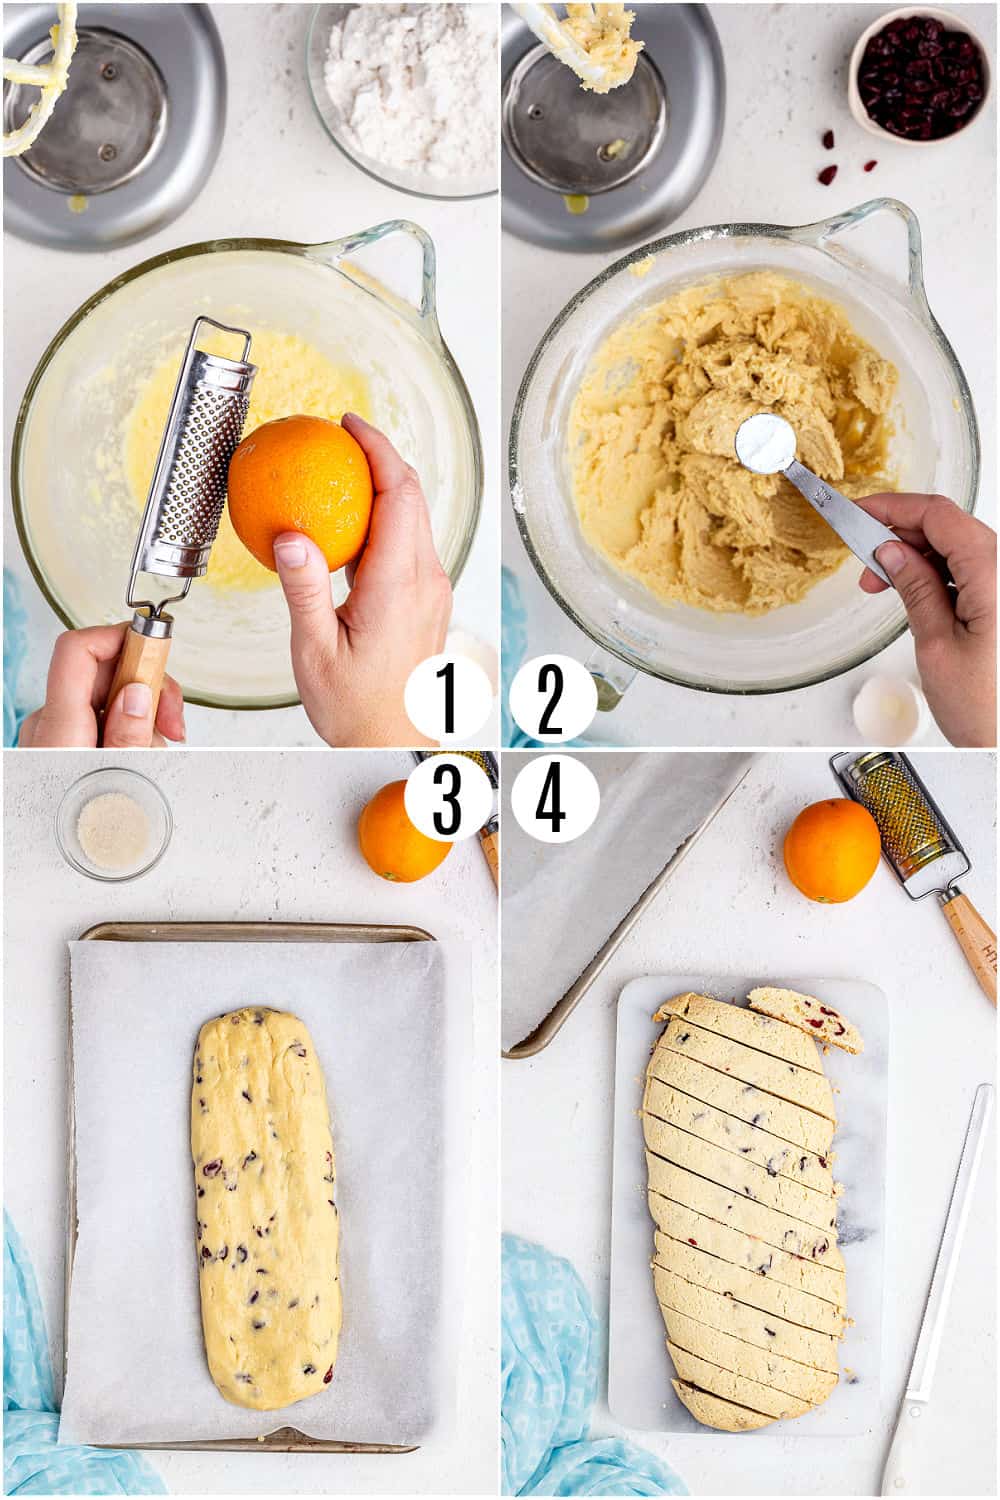 Step by step photos showing how to make cranberry orange biscotti.